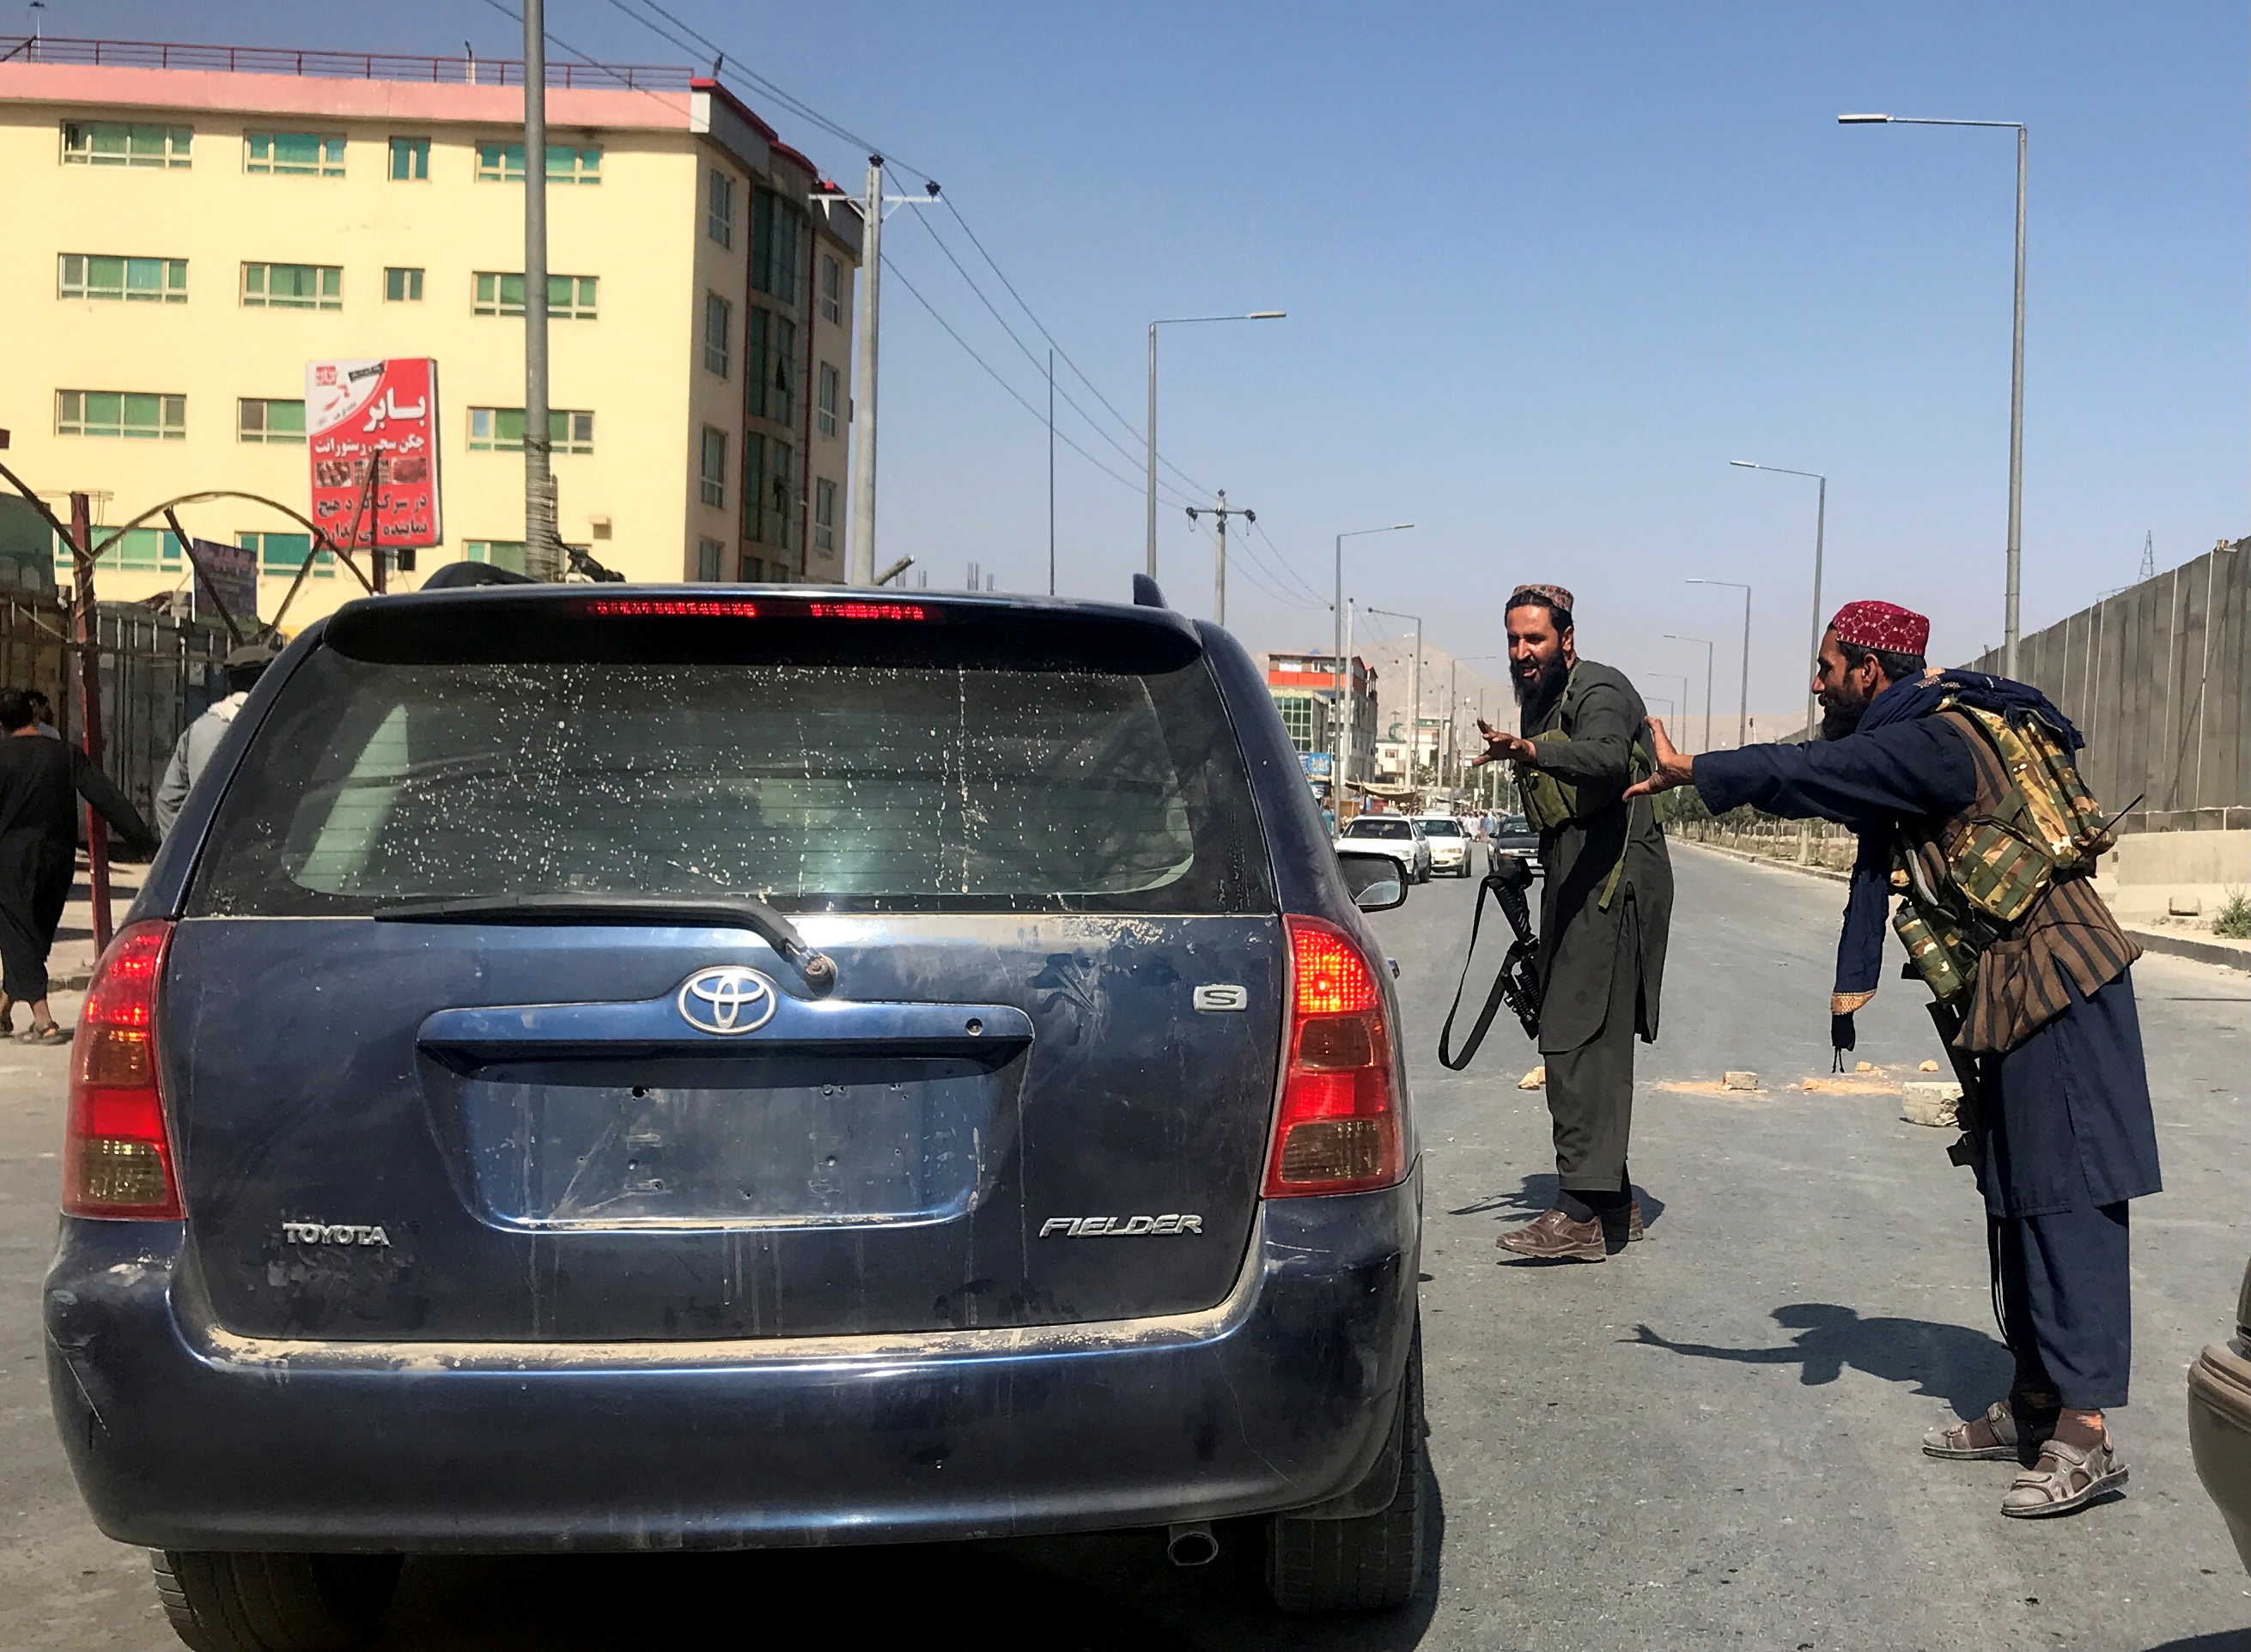 Members of Taliban forces gesture as they check a vehicle in Kabul